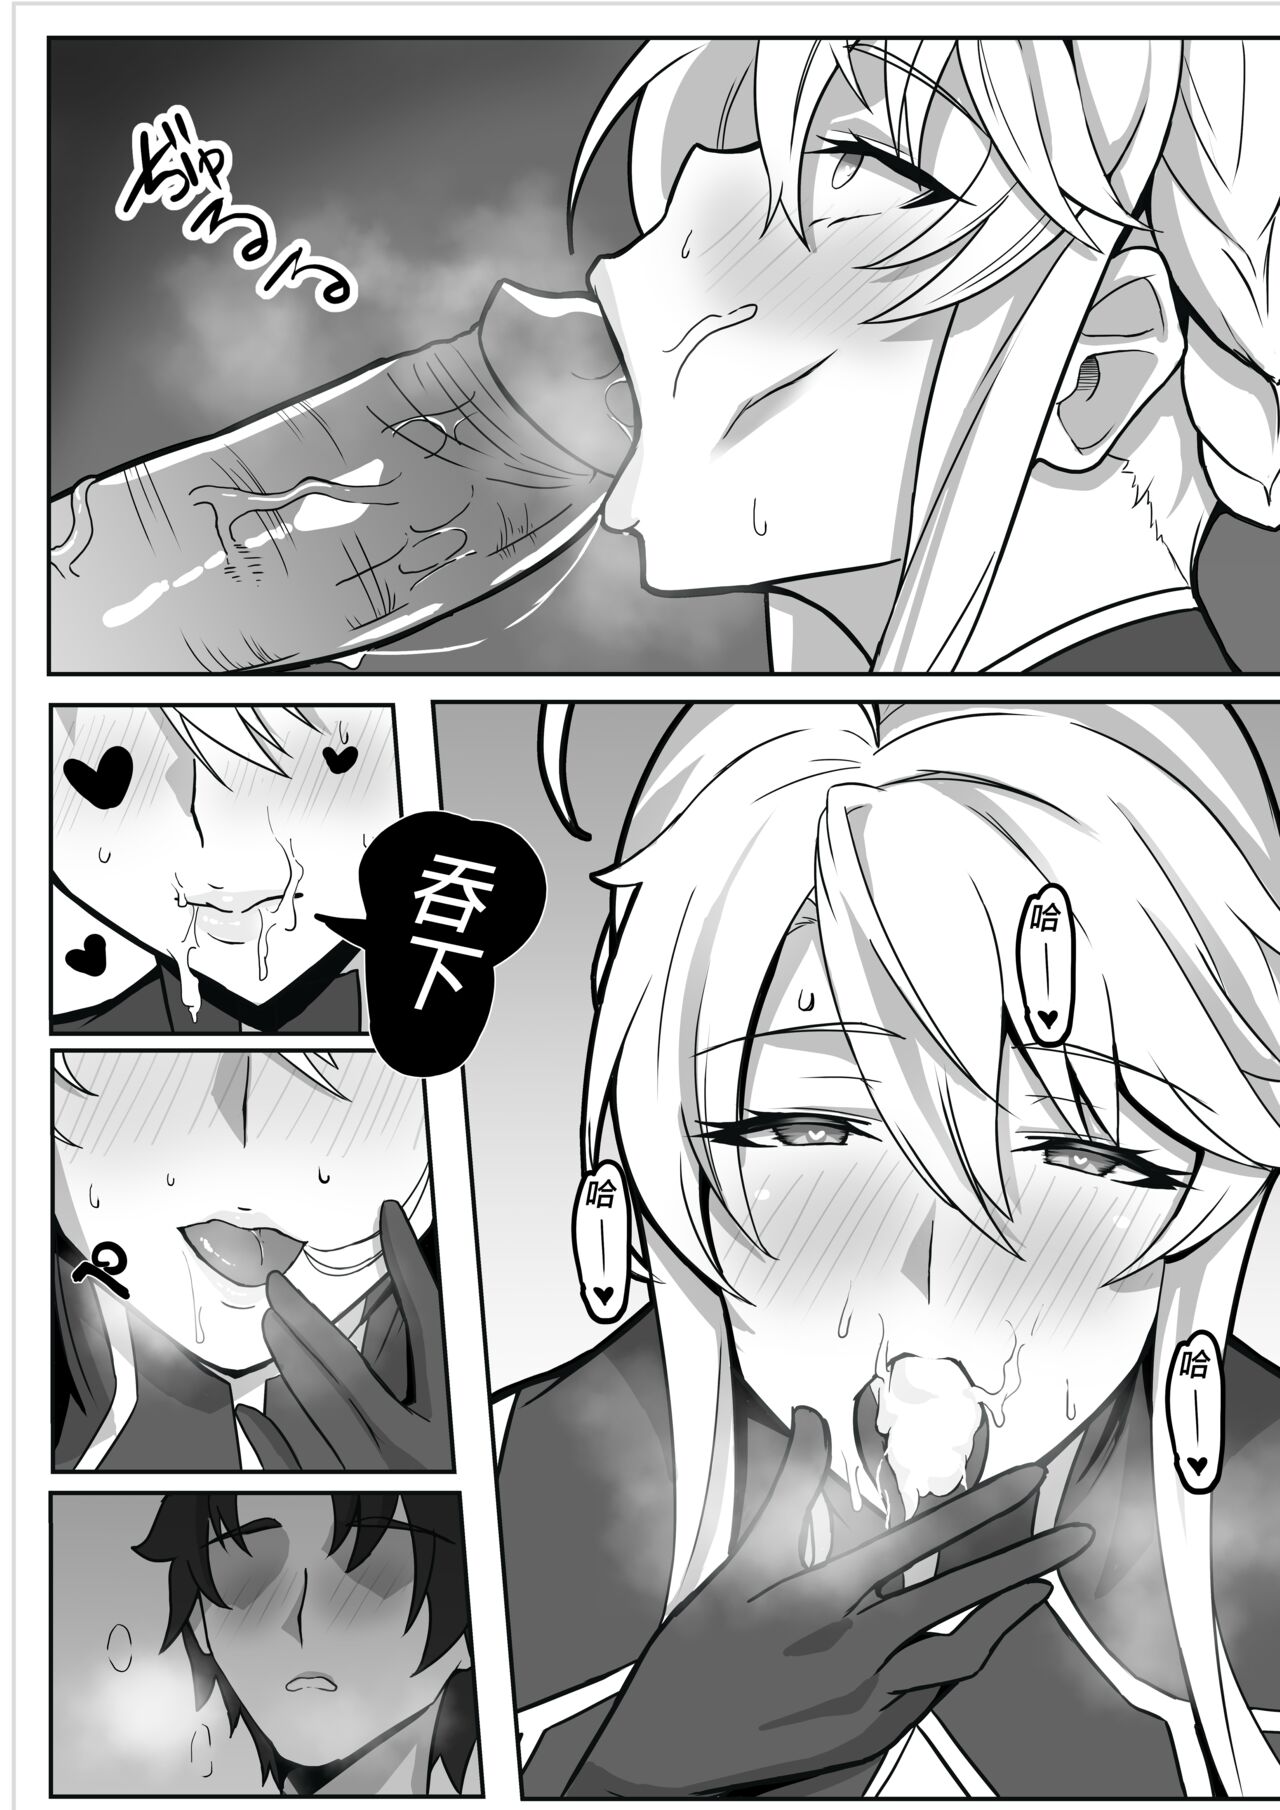 The Secret Communication of the King of Knights [シキ] 騎士王的秘密交流 (Fate/Grand Order) [中国語]